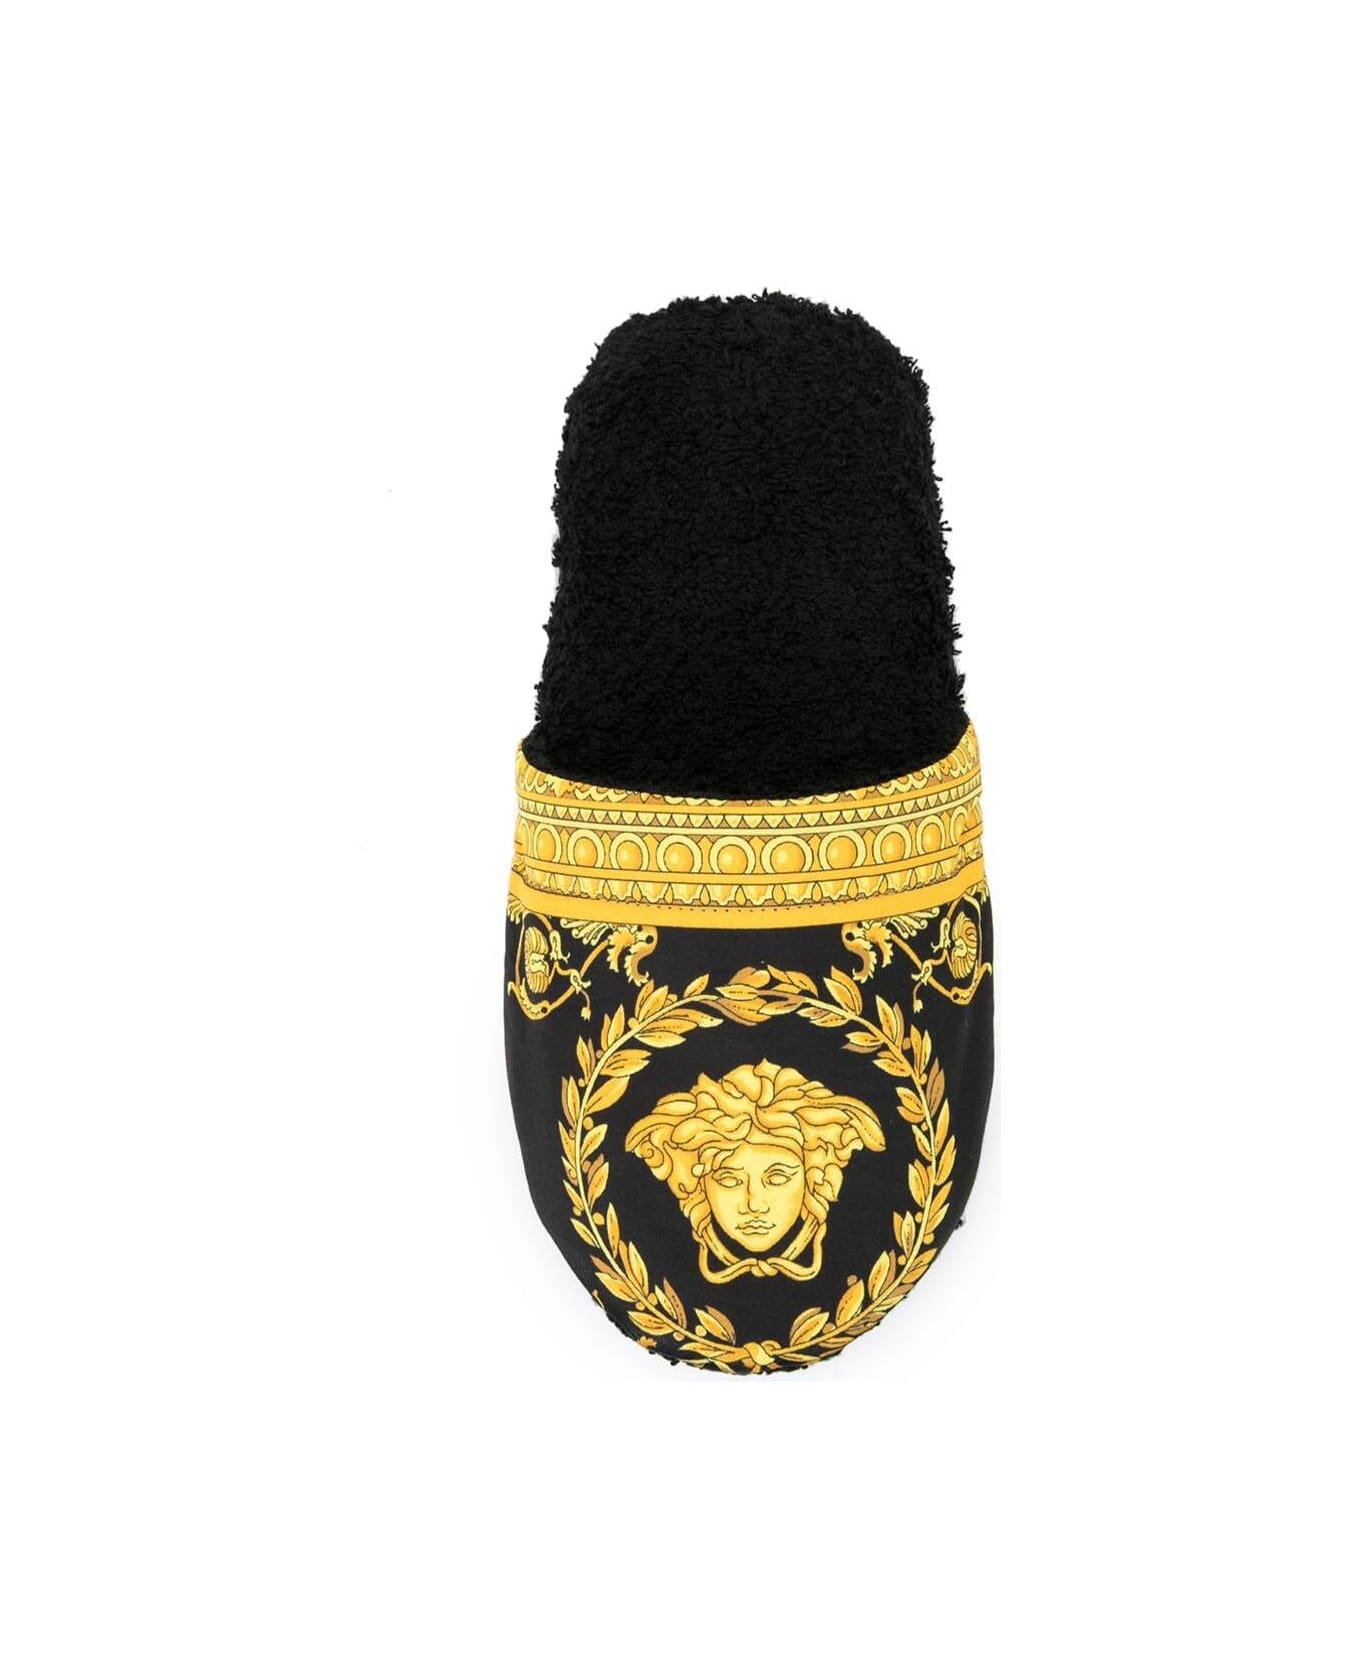 Versace Black And Gold House Slippers In Cotton And Terry With Baroque Print - Black